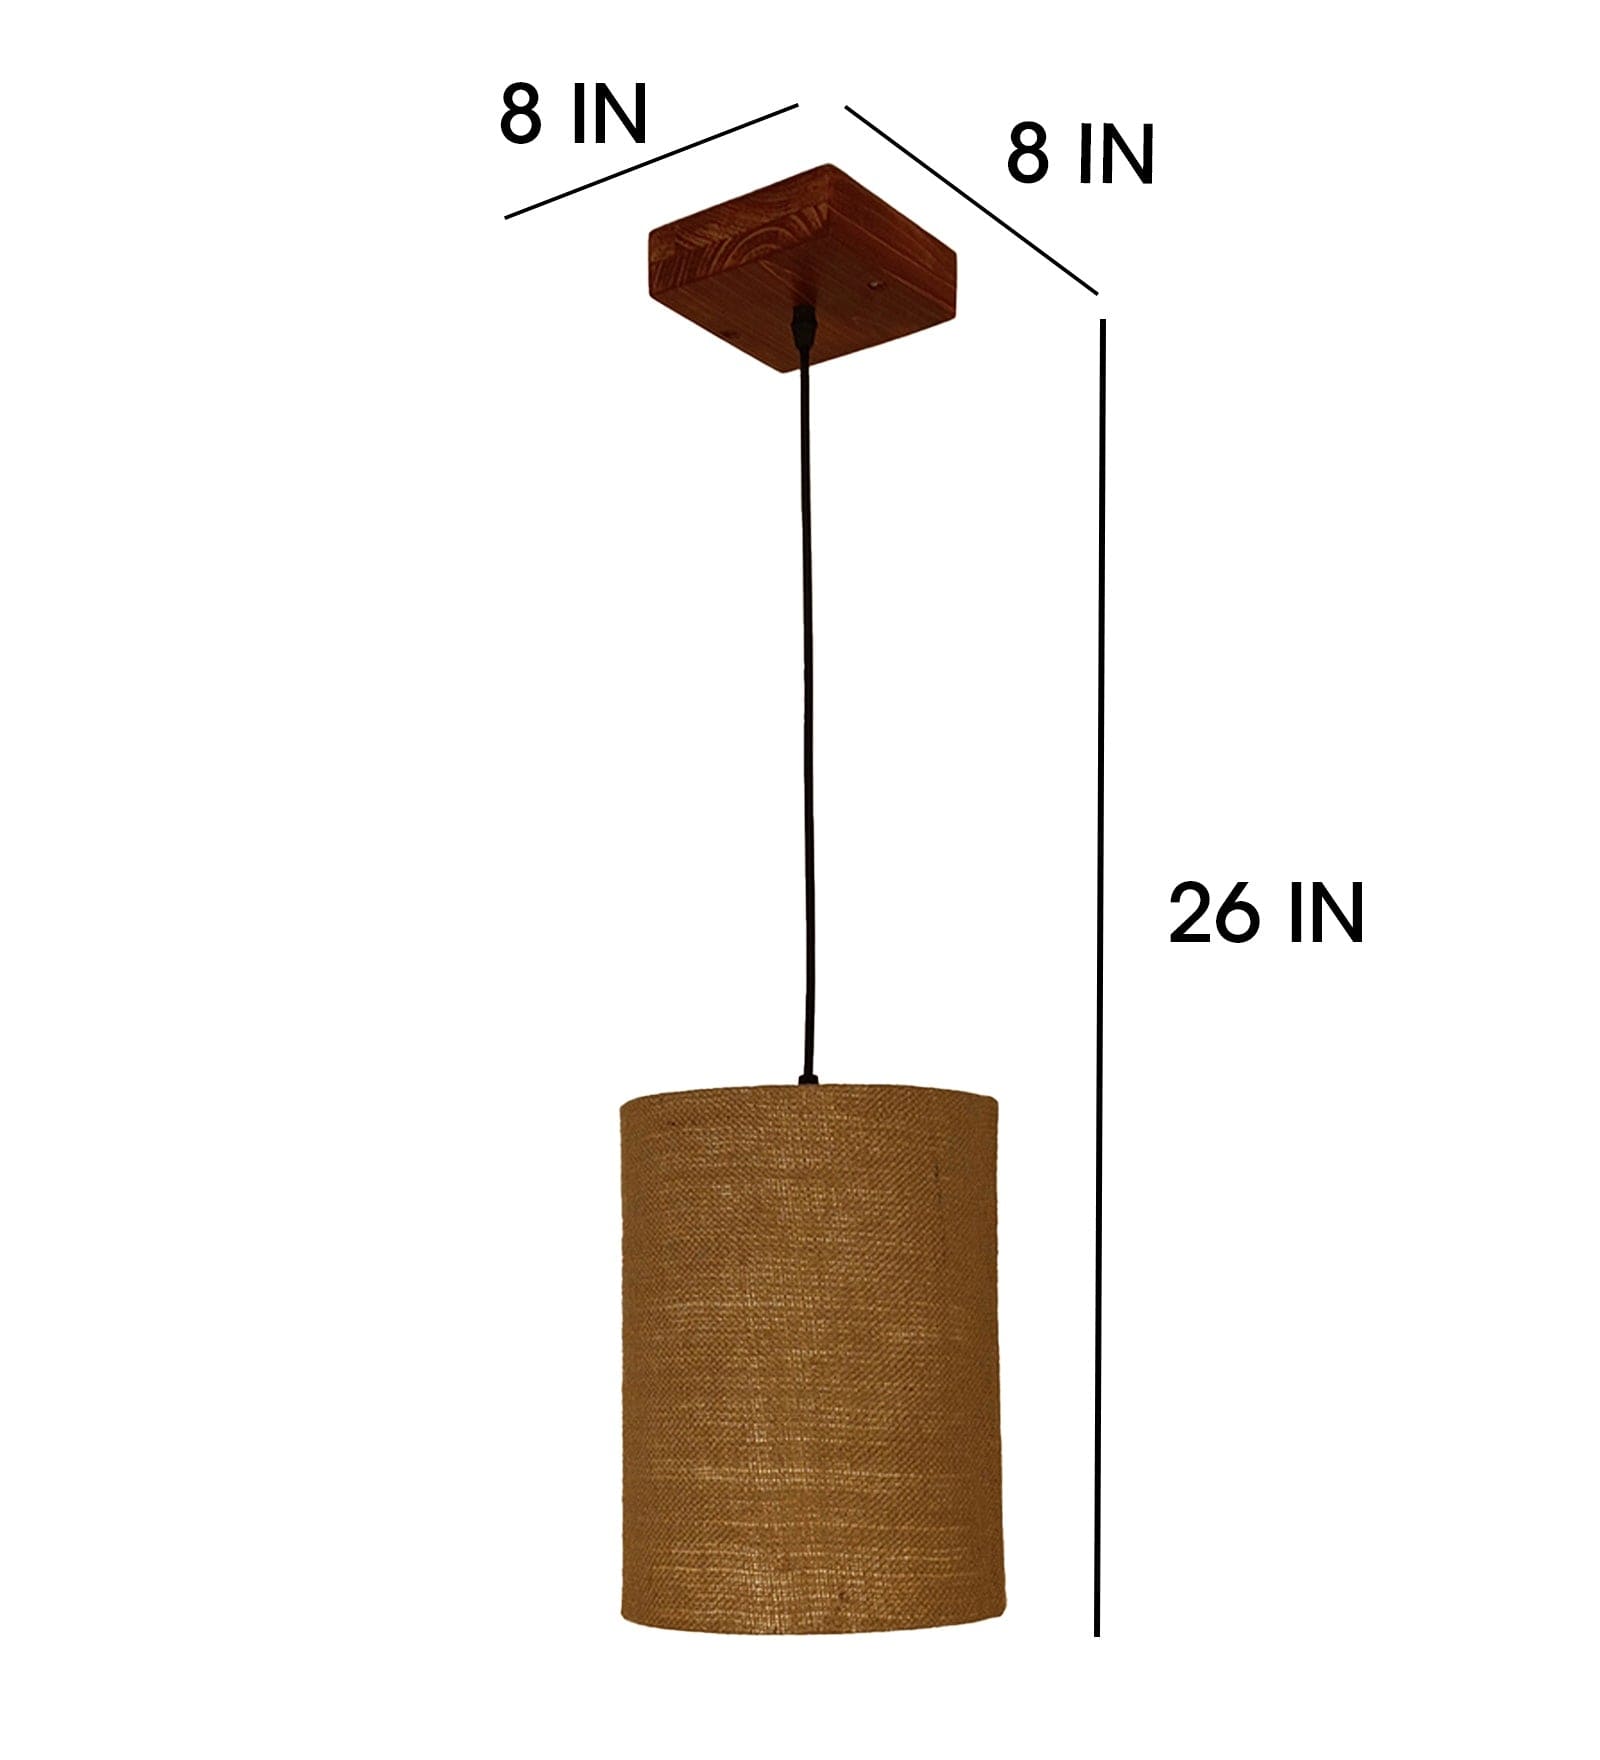 Elementary Brown Wooden Single Hanging Lamp (BULB NOT INCLUDED)